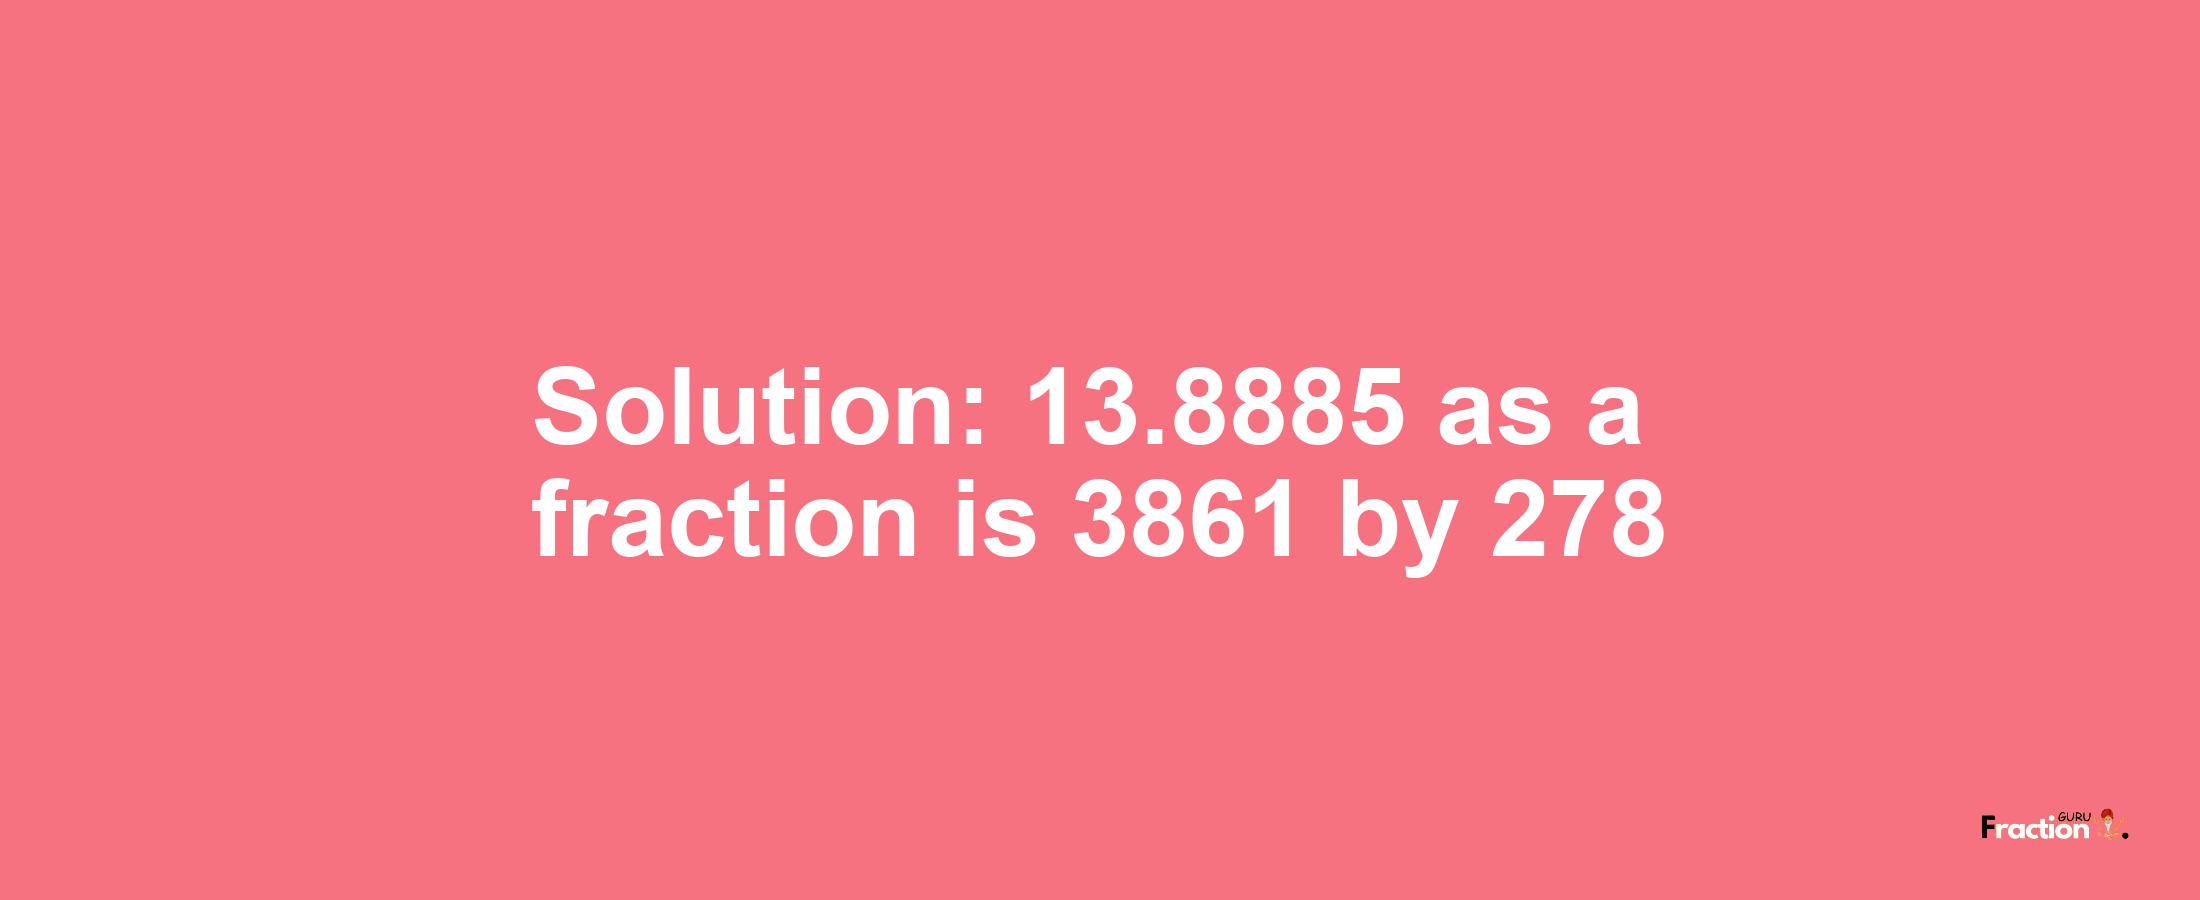 Solution:13.8885 as a fraction is 3861/278